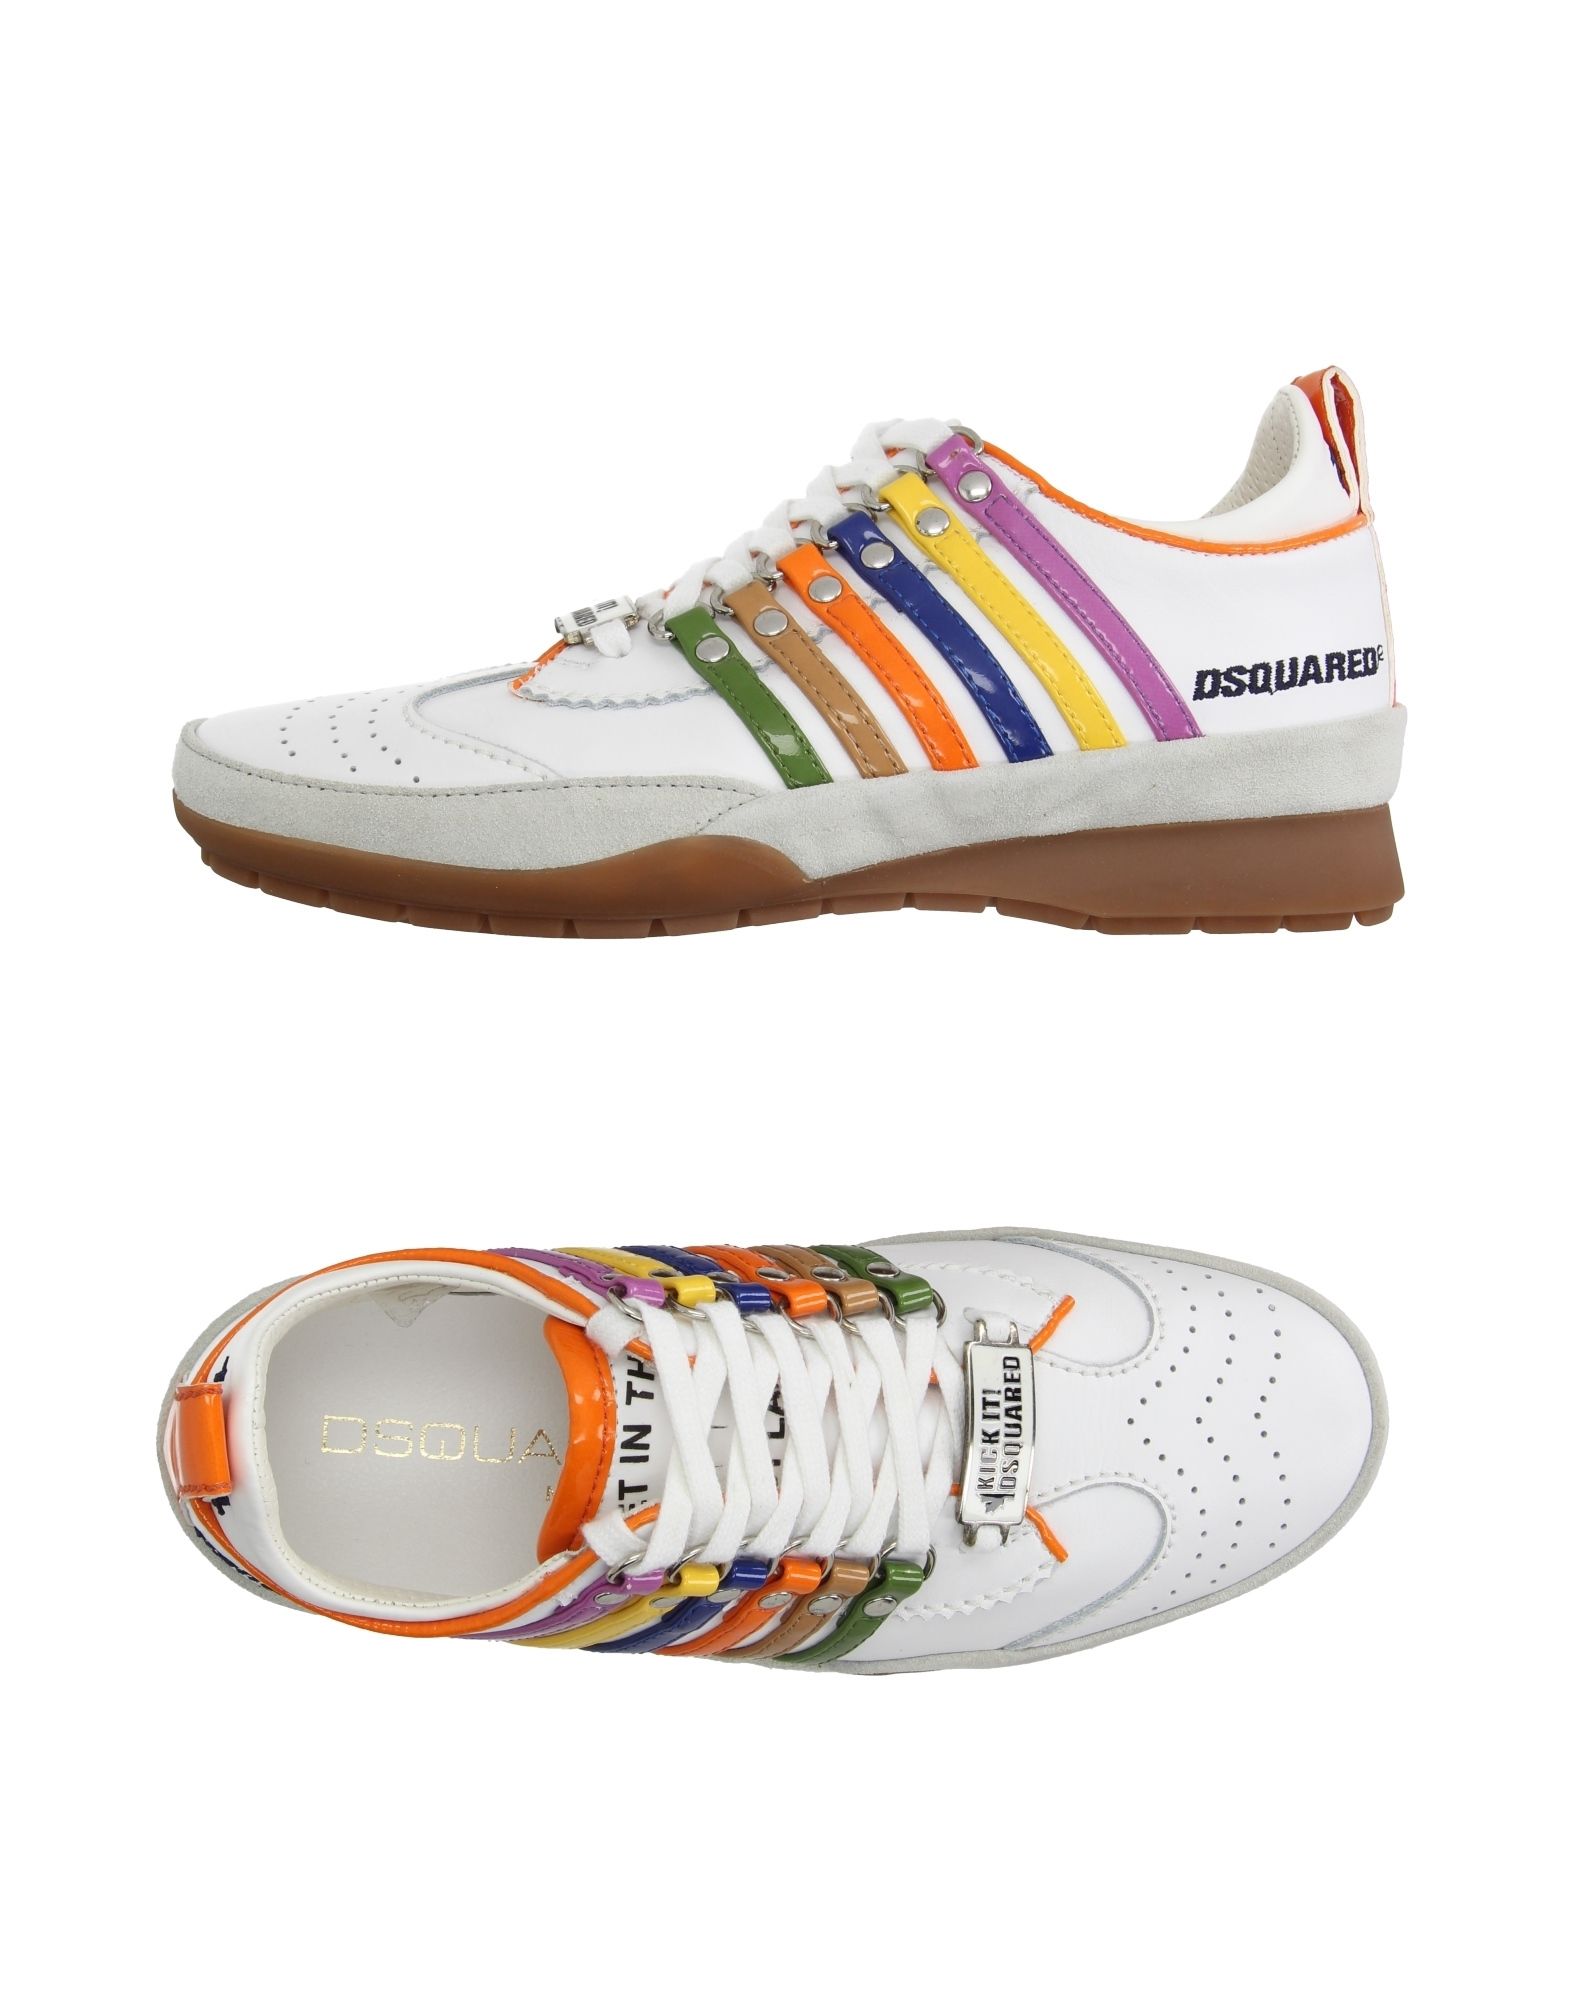 dsquared rainbow sneakers